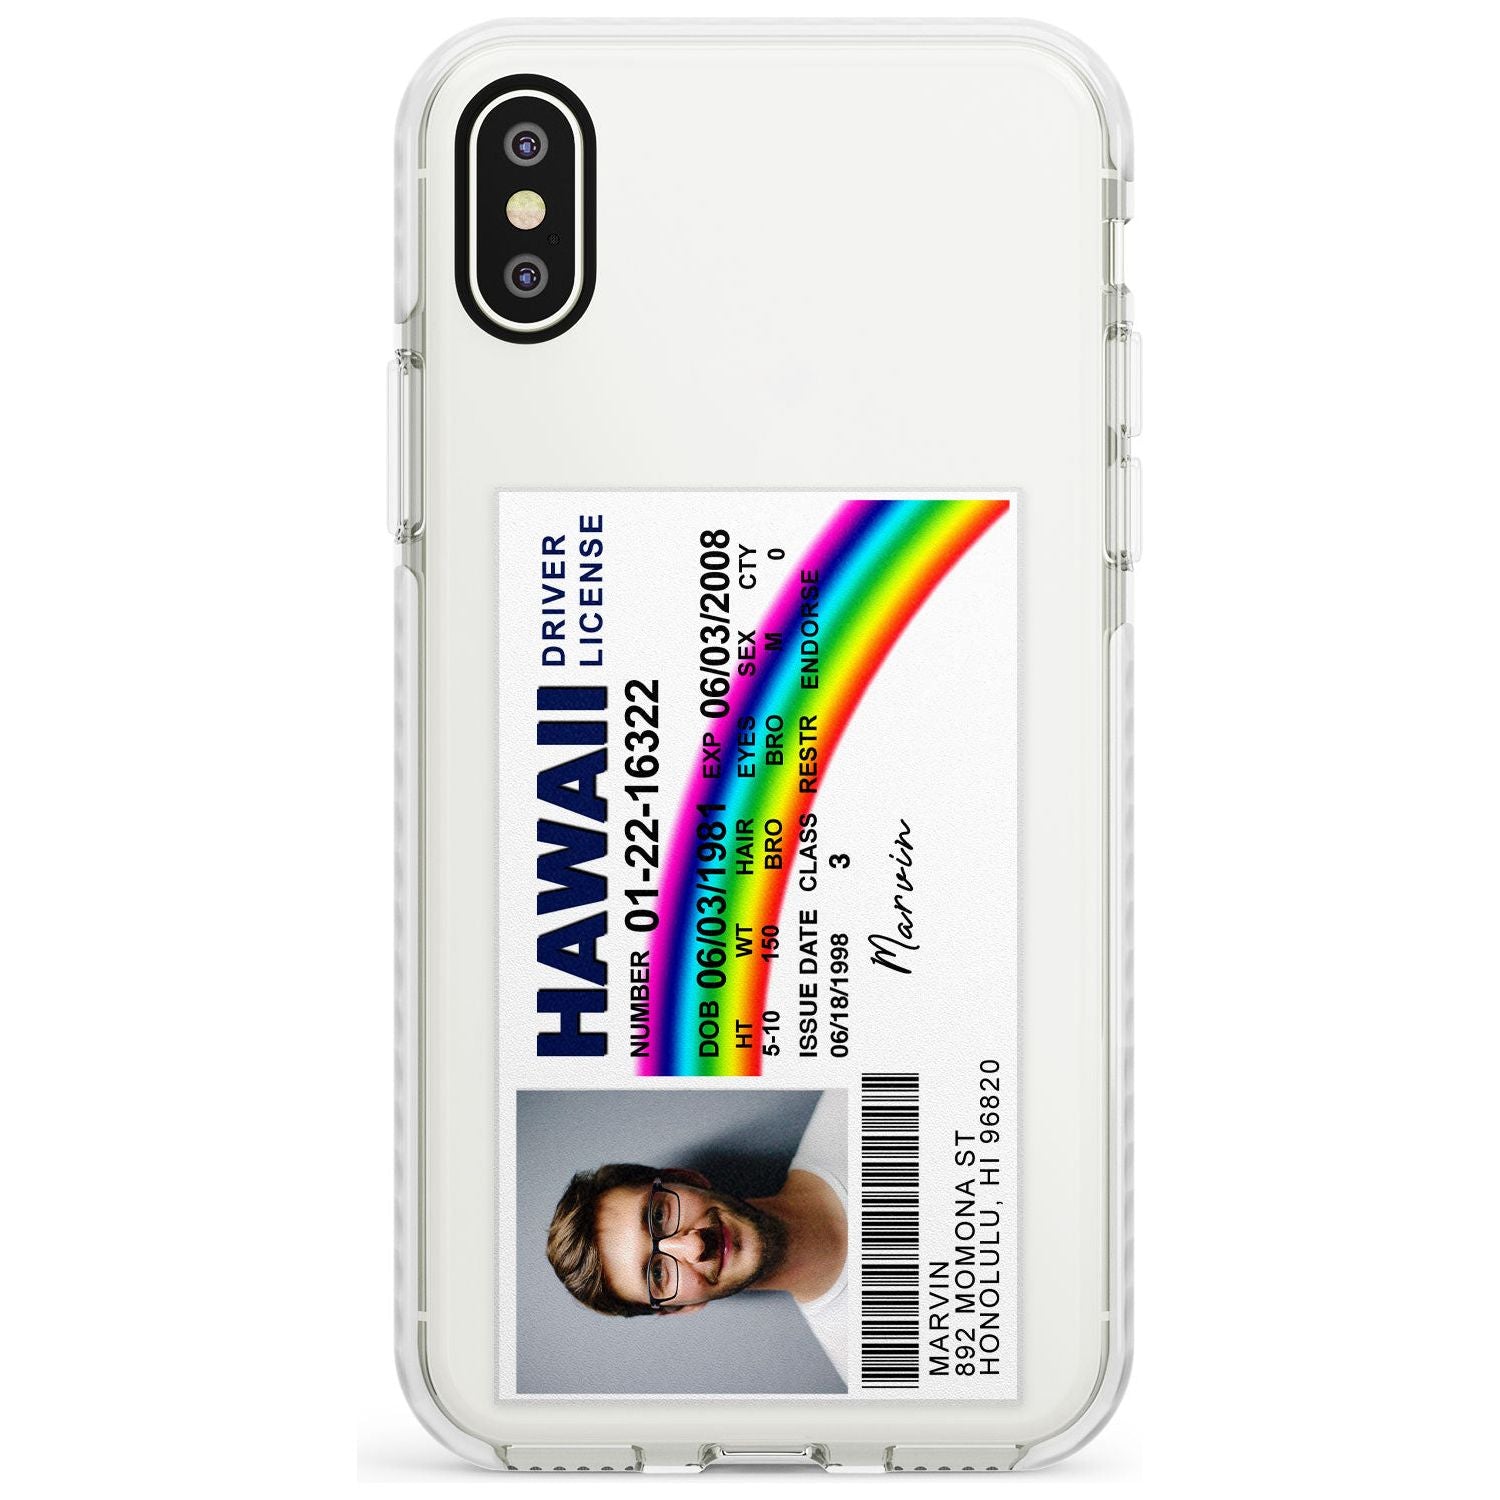 Personalised Hawaii Driving License Impact Phone Case for iPhone X XS Max XR